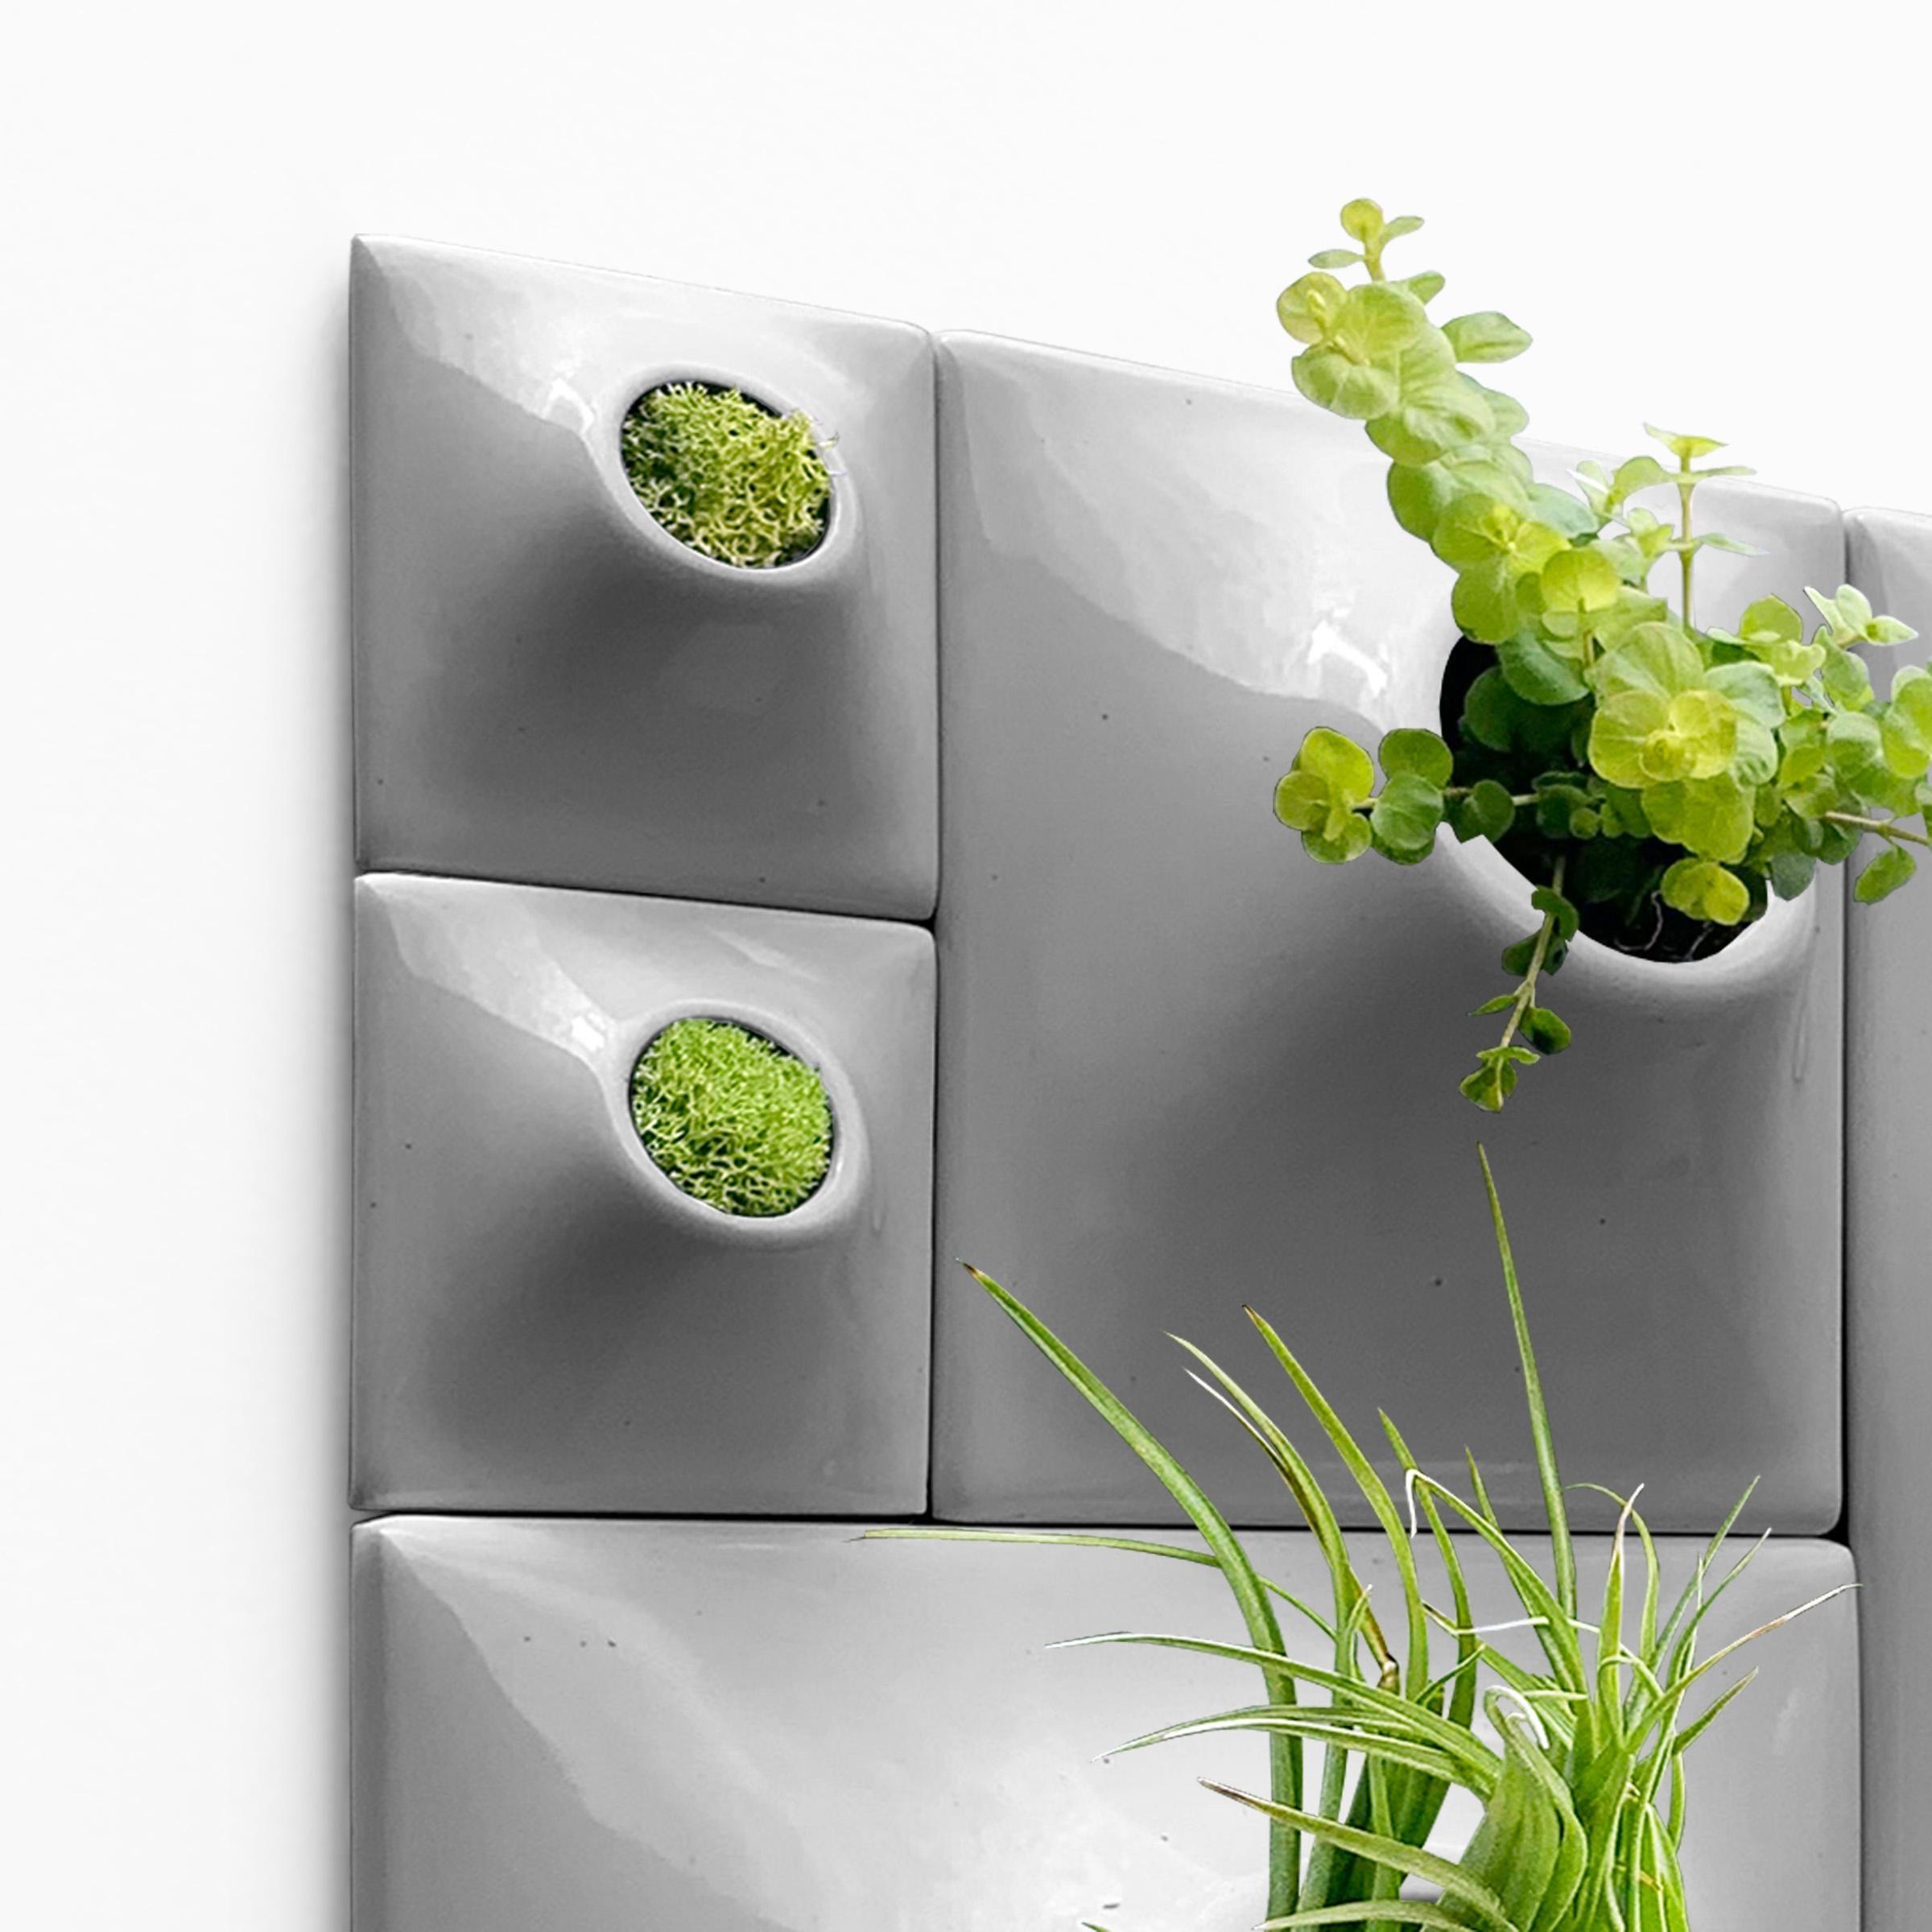 Modern Gray Wall Planter Set, Greenwall Sculpture, Living Wall Decor, Node BS2M In New Condition For Sale In Bridgeport, PA